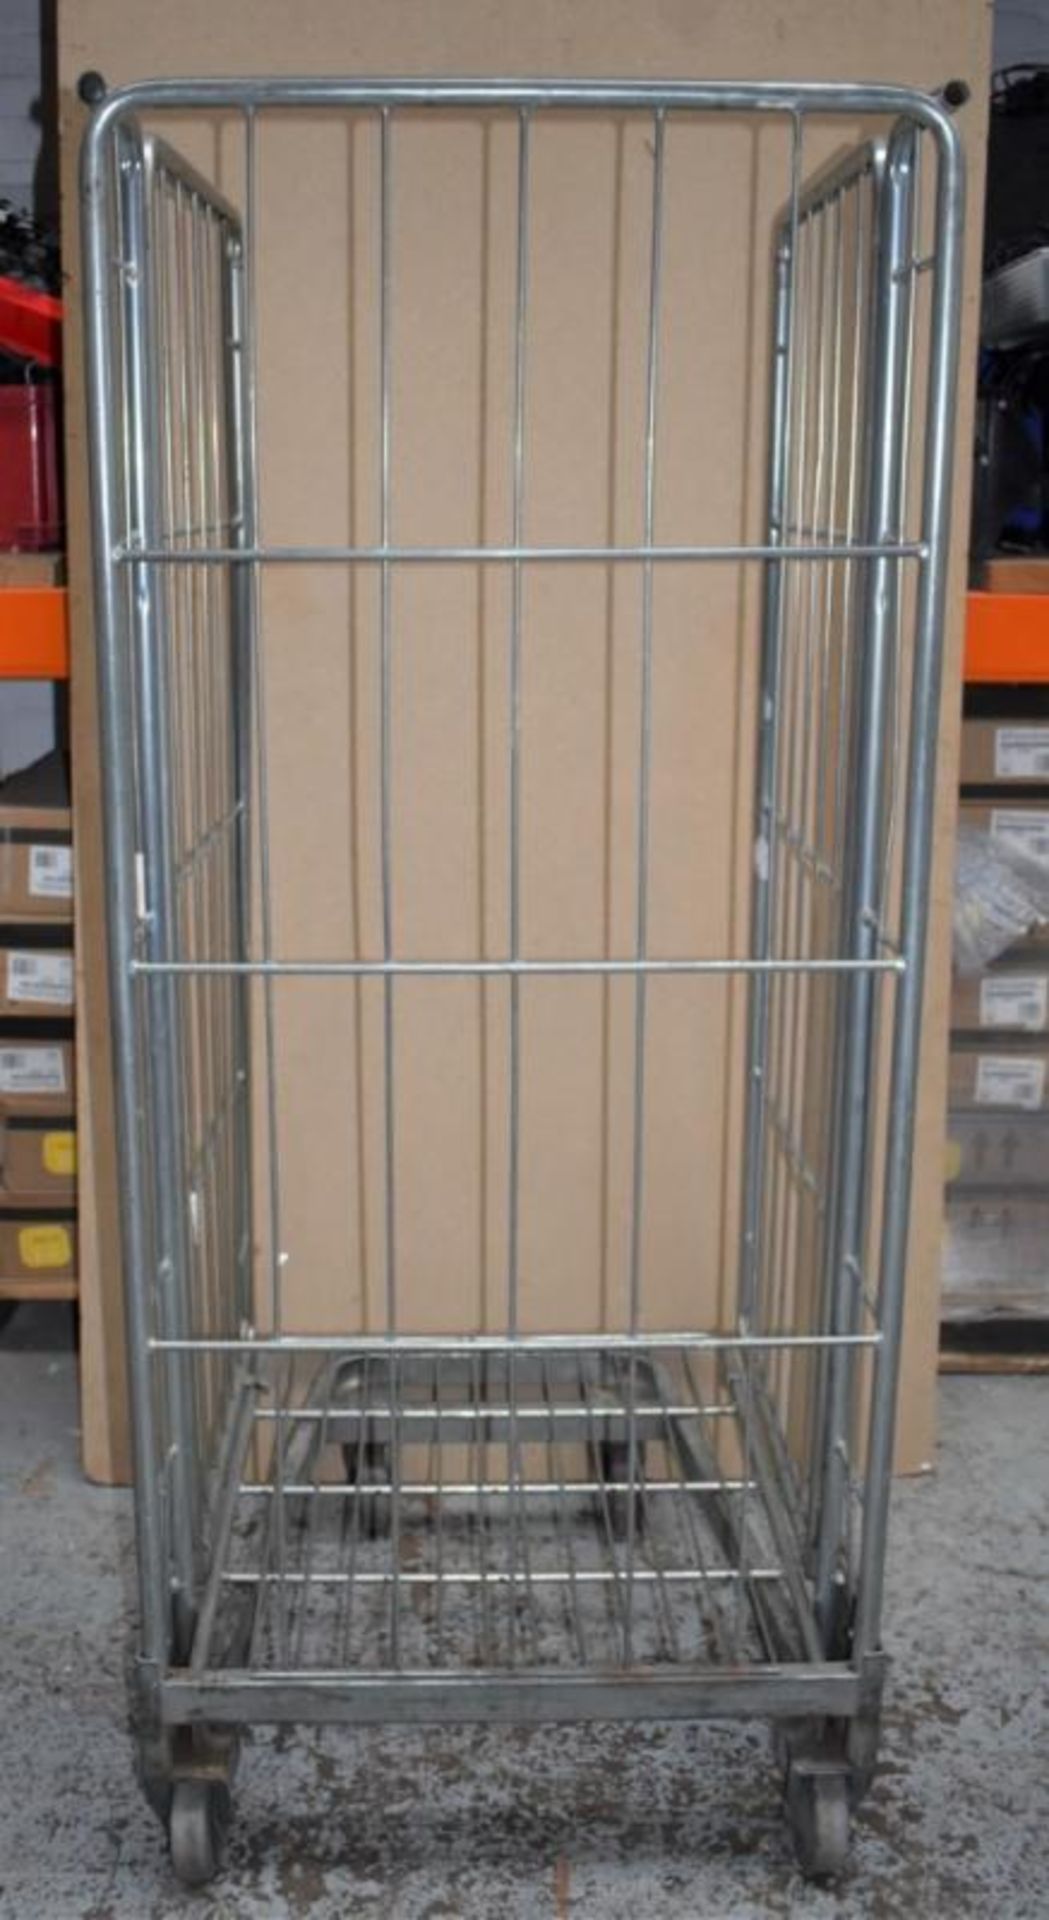 1 x Roller Cage With Heavy Duty Castors - Demountable With Three Sides - Ideal For Storing and Movin - Image 3 of 9